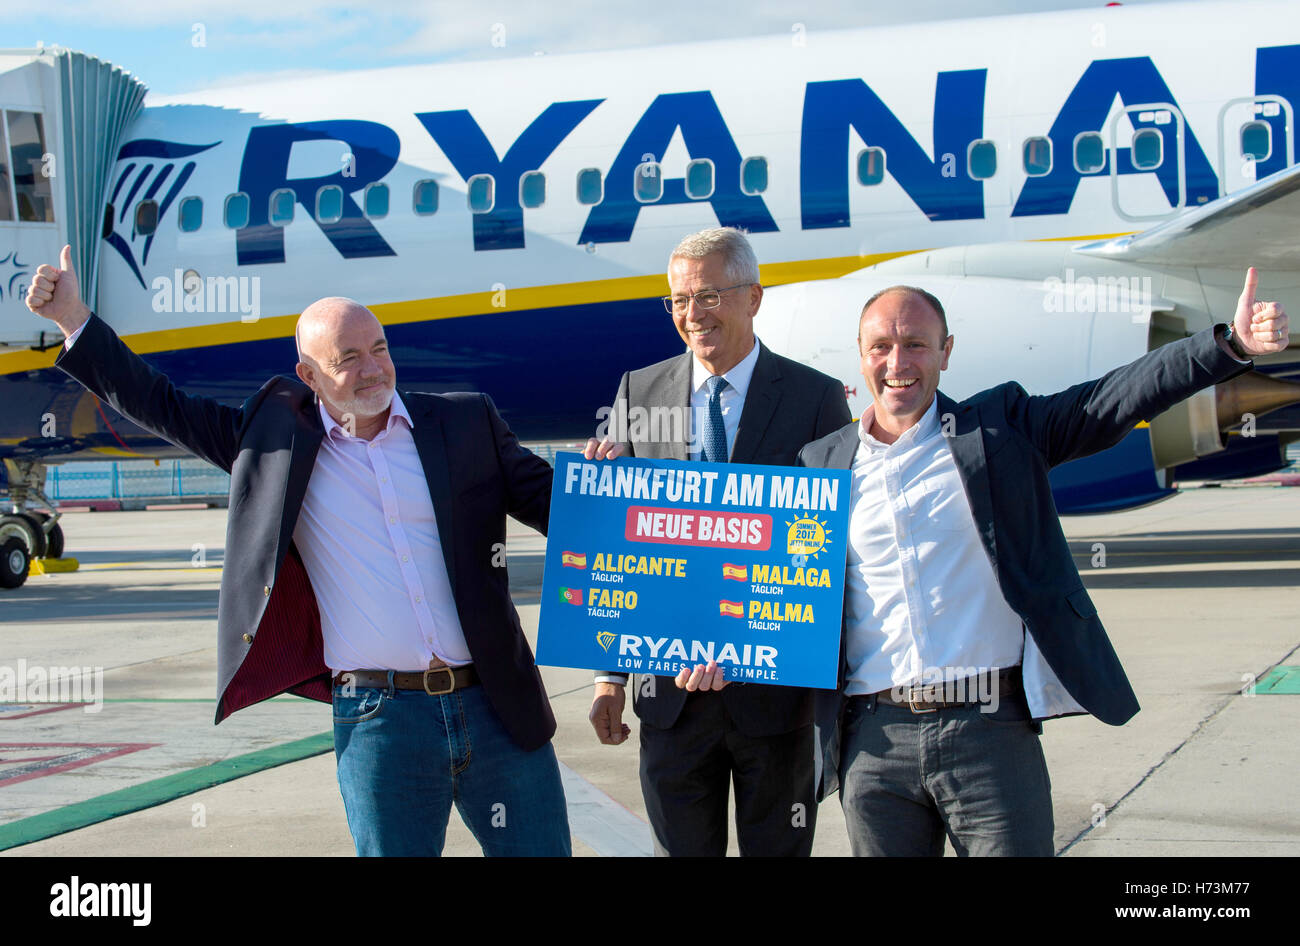 David O·Brien (L-R, Chief Commercial Officer at Ryanair), Stefan Schulte (CEO of Fraport AG) and Kenny Jacobs (Chief Marketing Officer Ryan Air) stand with a sign that reads 'Frankfurt am Main new base' at the airport in Frankfurt am Main, Germany, 02 November 2016. Two Lufthansa airplanes can be seen in the background. Airport operator Fraport and the Irish discount airline Ryanair are delivering statements at a joint press conference on the Ryanair's future offerings at the Frankfurt am Main airport. For the occasion, an airplane from Rynair landed for the first time at the airport. Photo: A Stock Photo